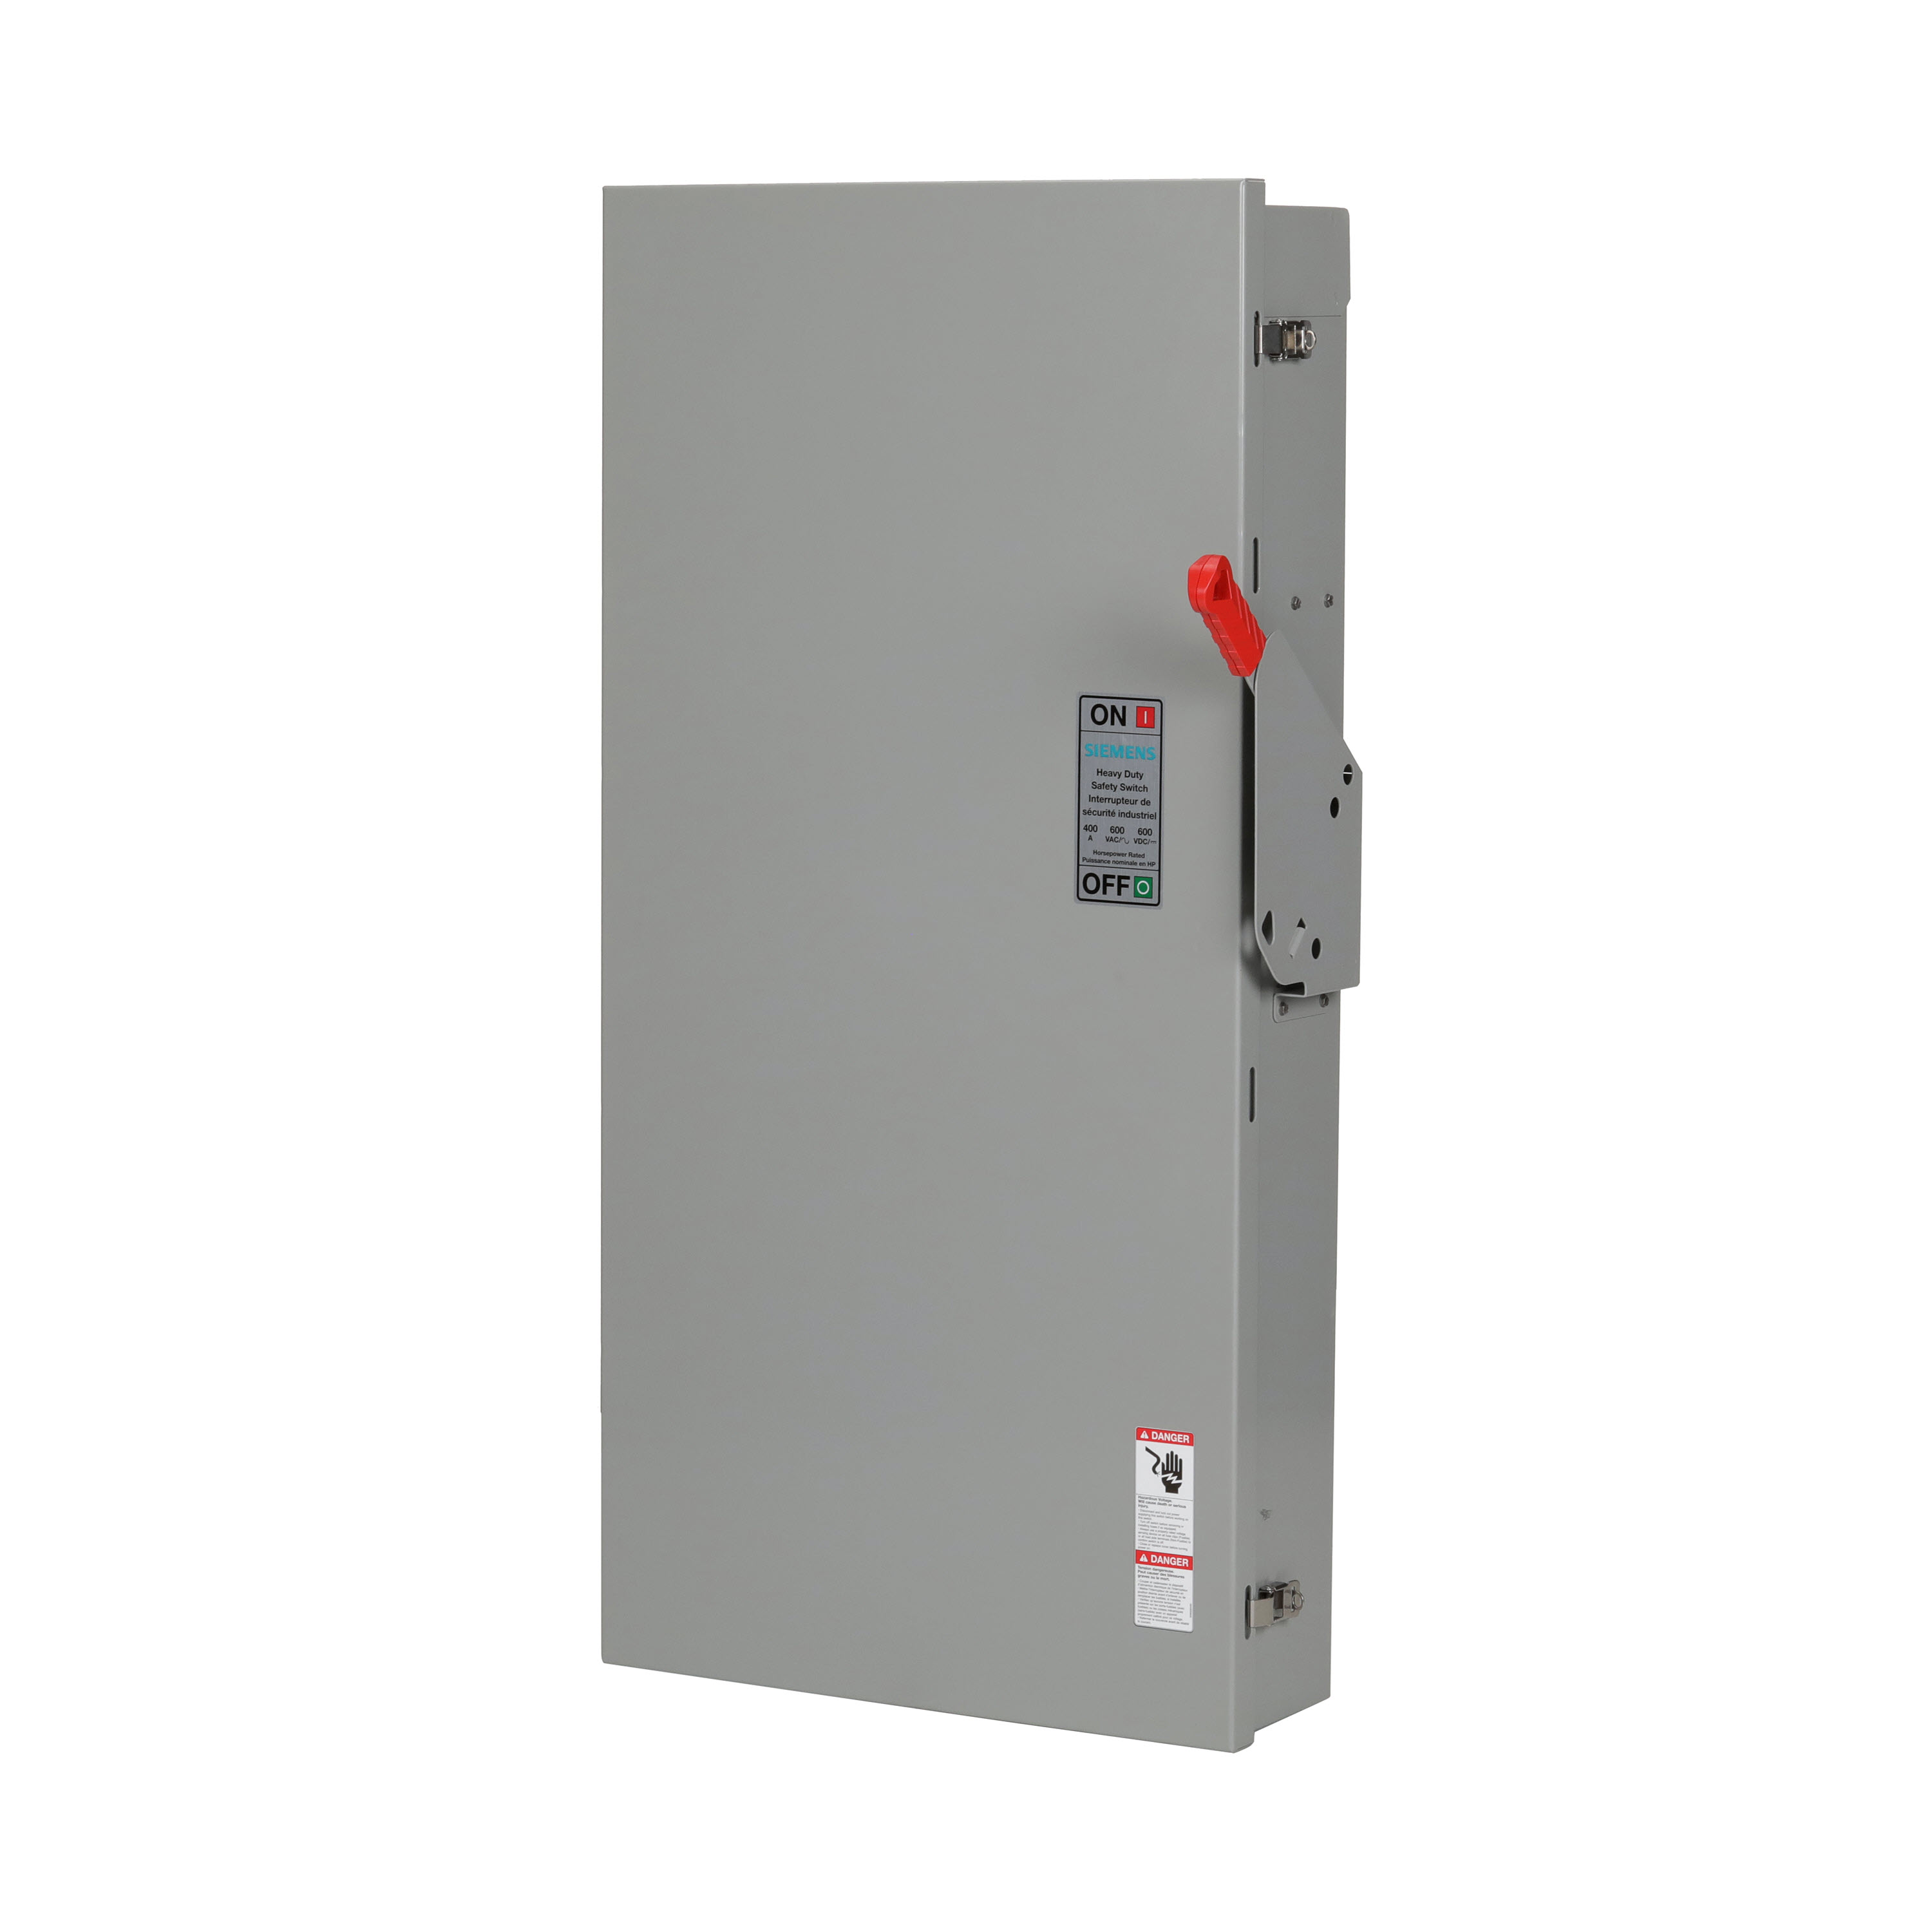 Siemens Low Voltage Circuit Protection Heavy Duty Safety Switches. CSA 400A 3P 4W 600V FUSED HD TY 3R